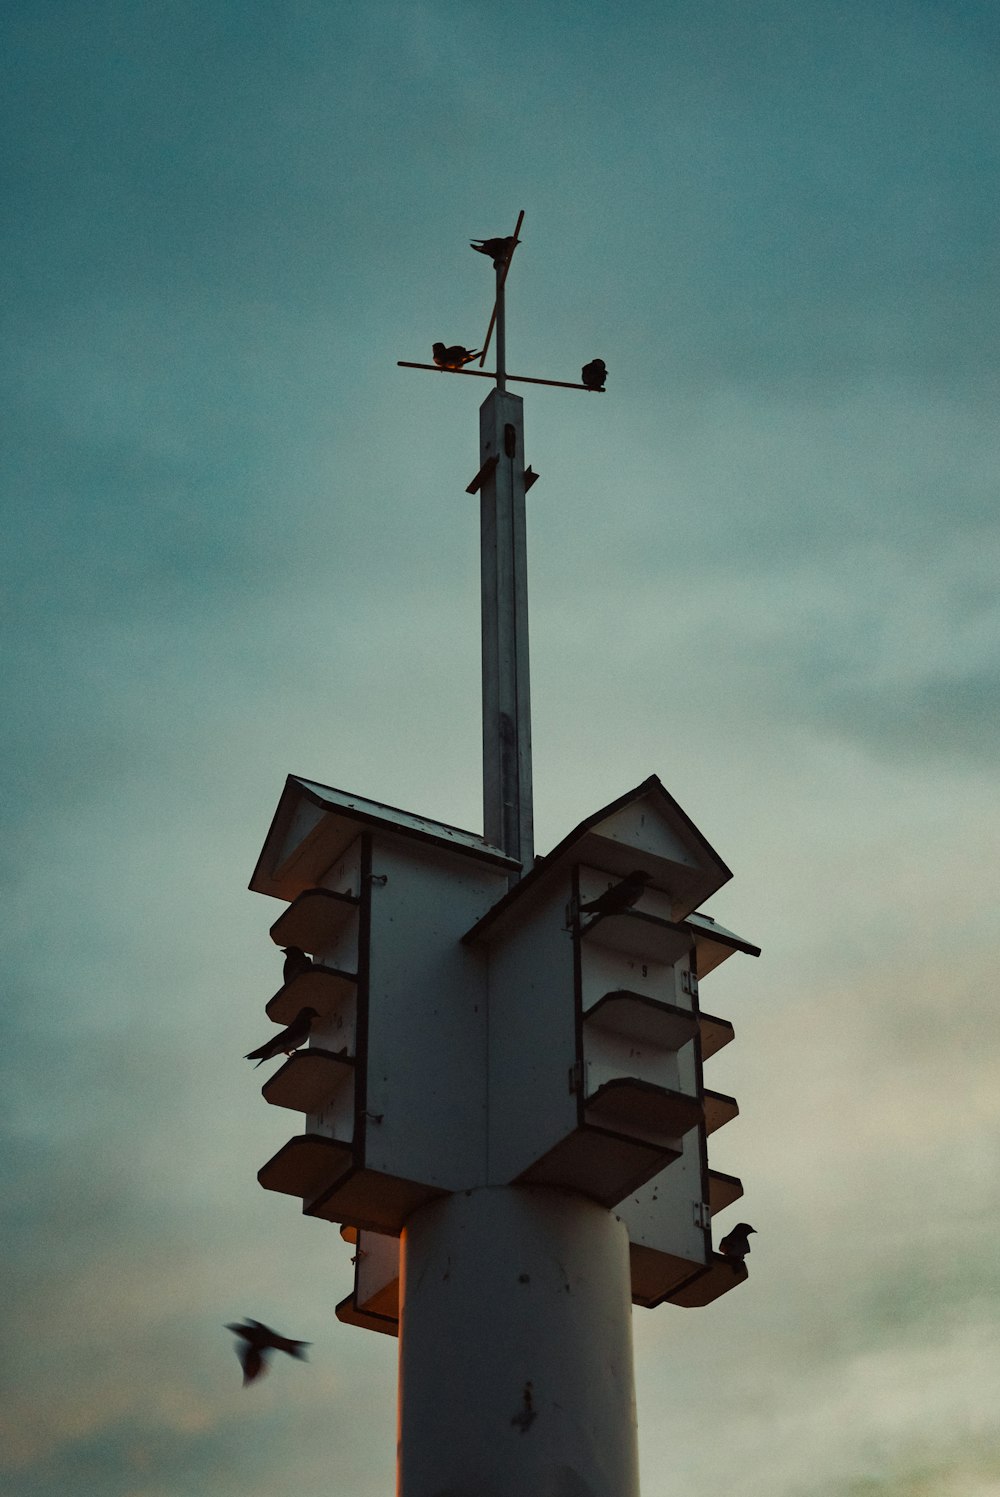 a bird is flying near a tower with a weather vane